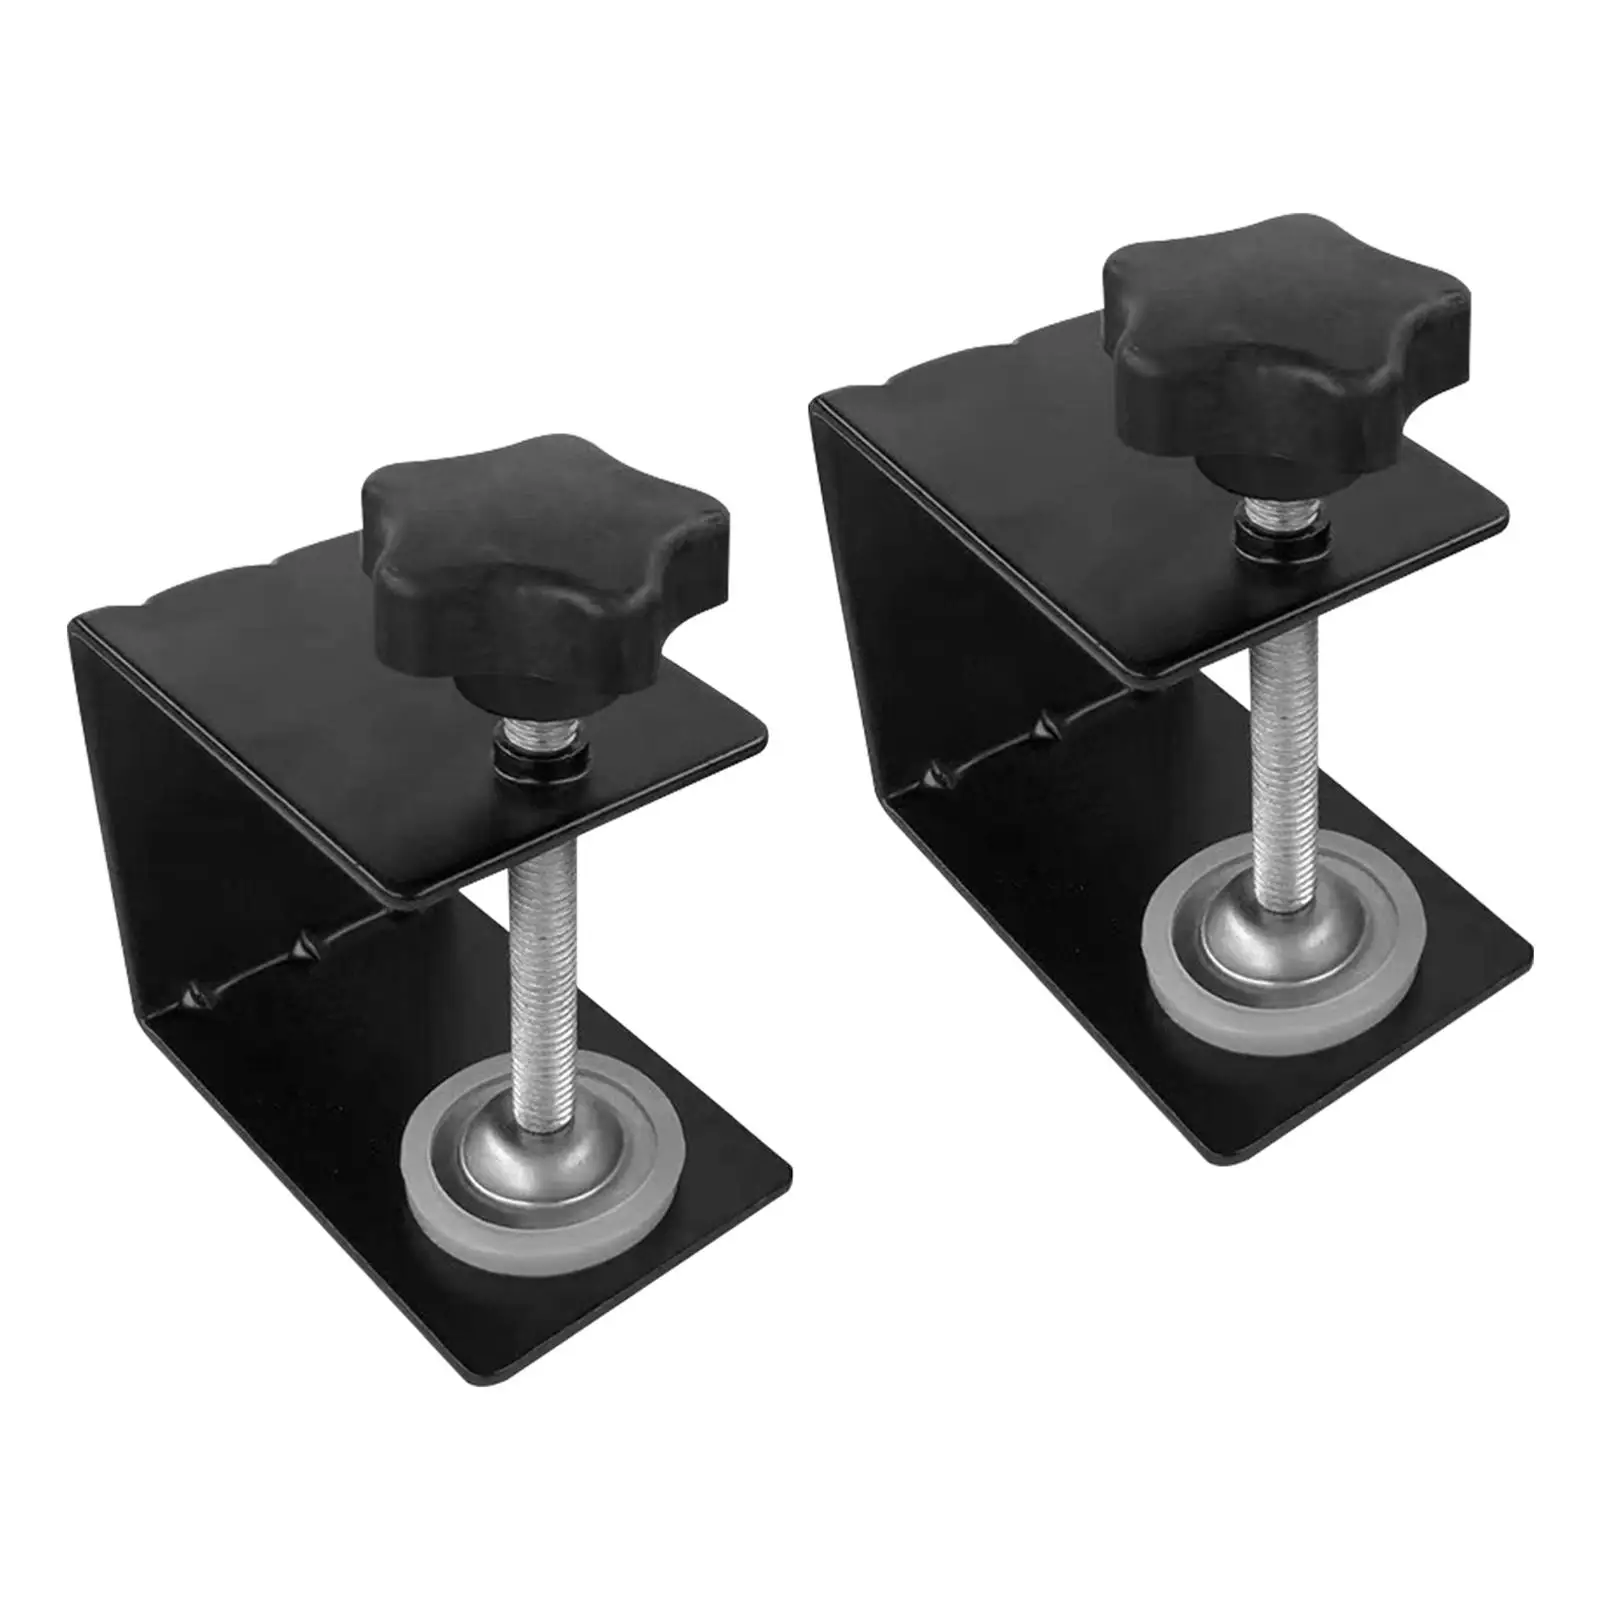 2x Portable Drawer Front Clamps Multifunction with Easy Adjustment Tool Hardware Mounting for Cabinet Woodworking Craft Repair